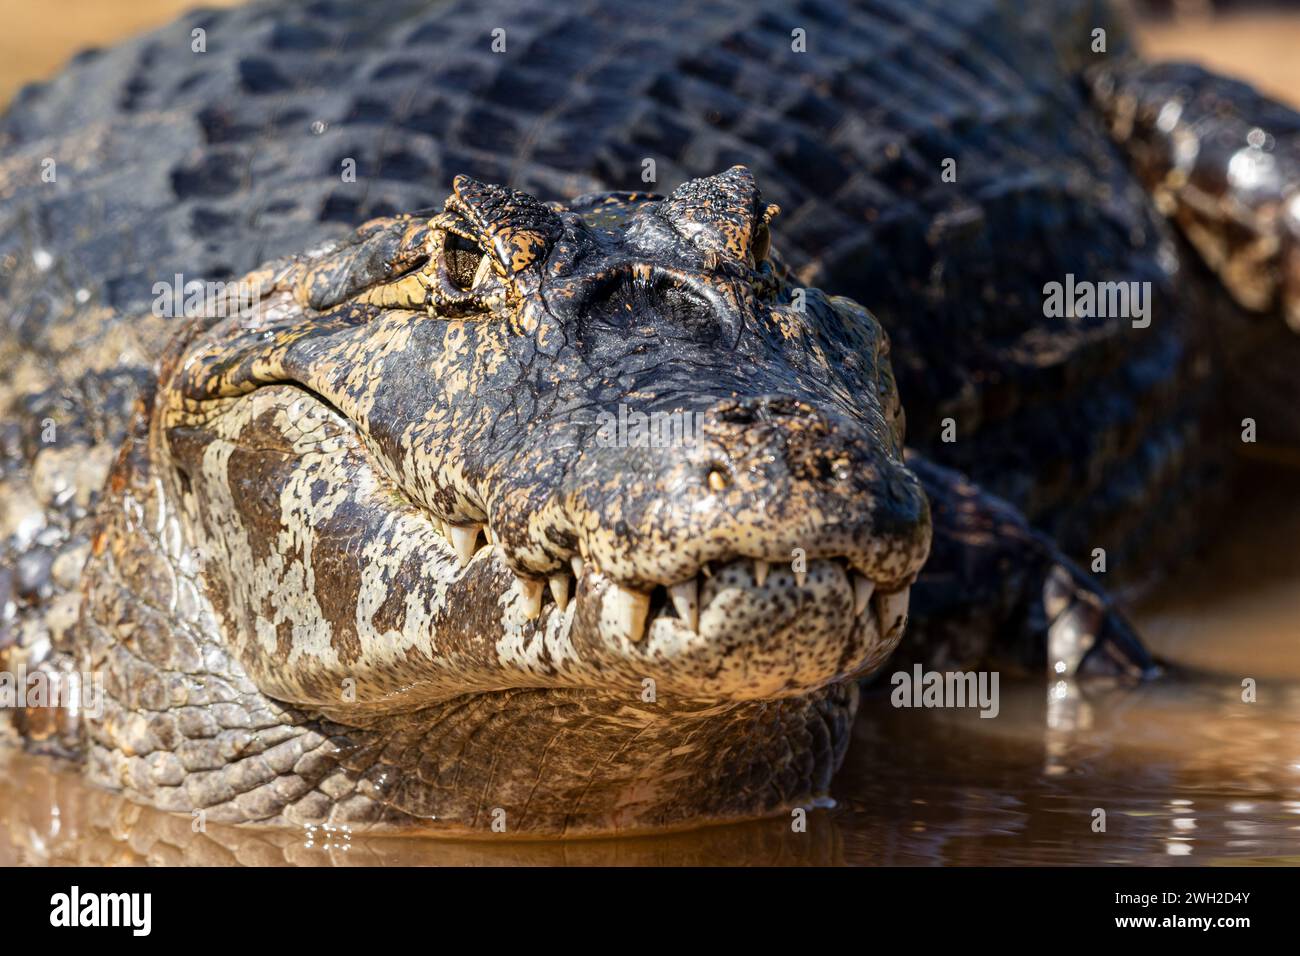 Caiman laying down looking at the camera in the shallows of the Cuiaba River in The Pantanal, Brazil, South America Stock Photo